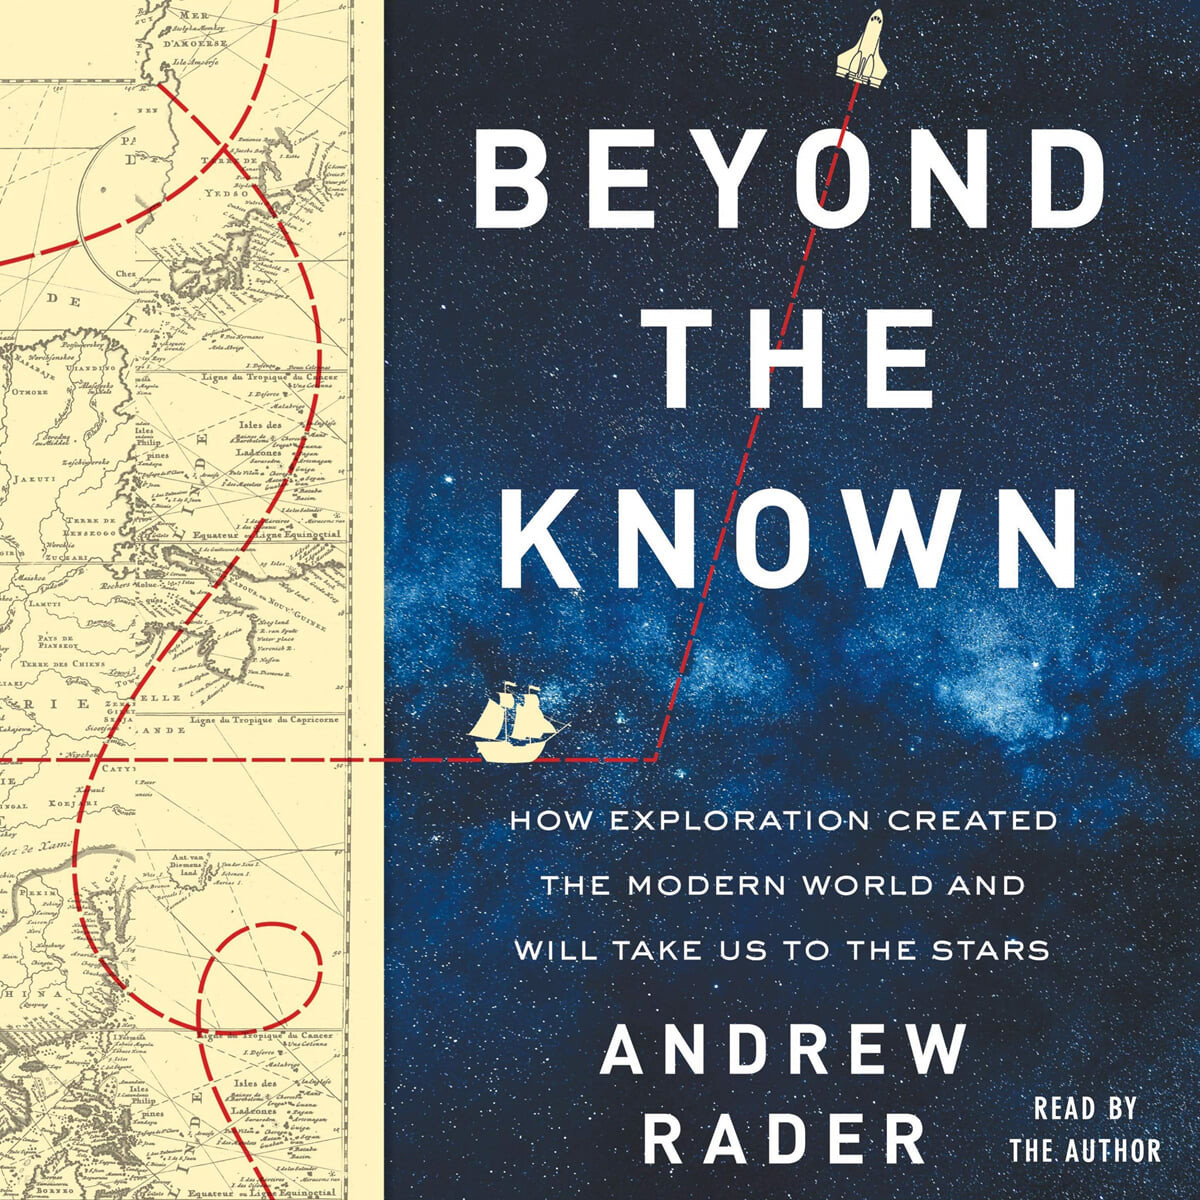 Beyond the Known: How Exploration Created the Modern World and Will Take Us to the Stars (How Exploration Created the Modern World and Will Take Us to the Stars)